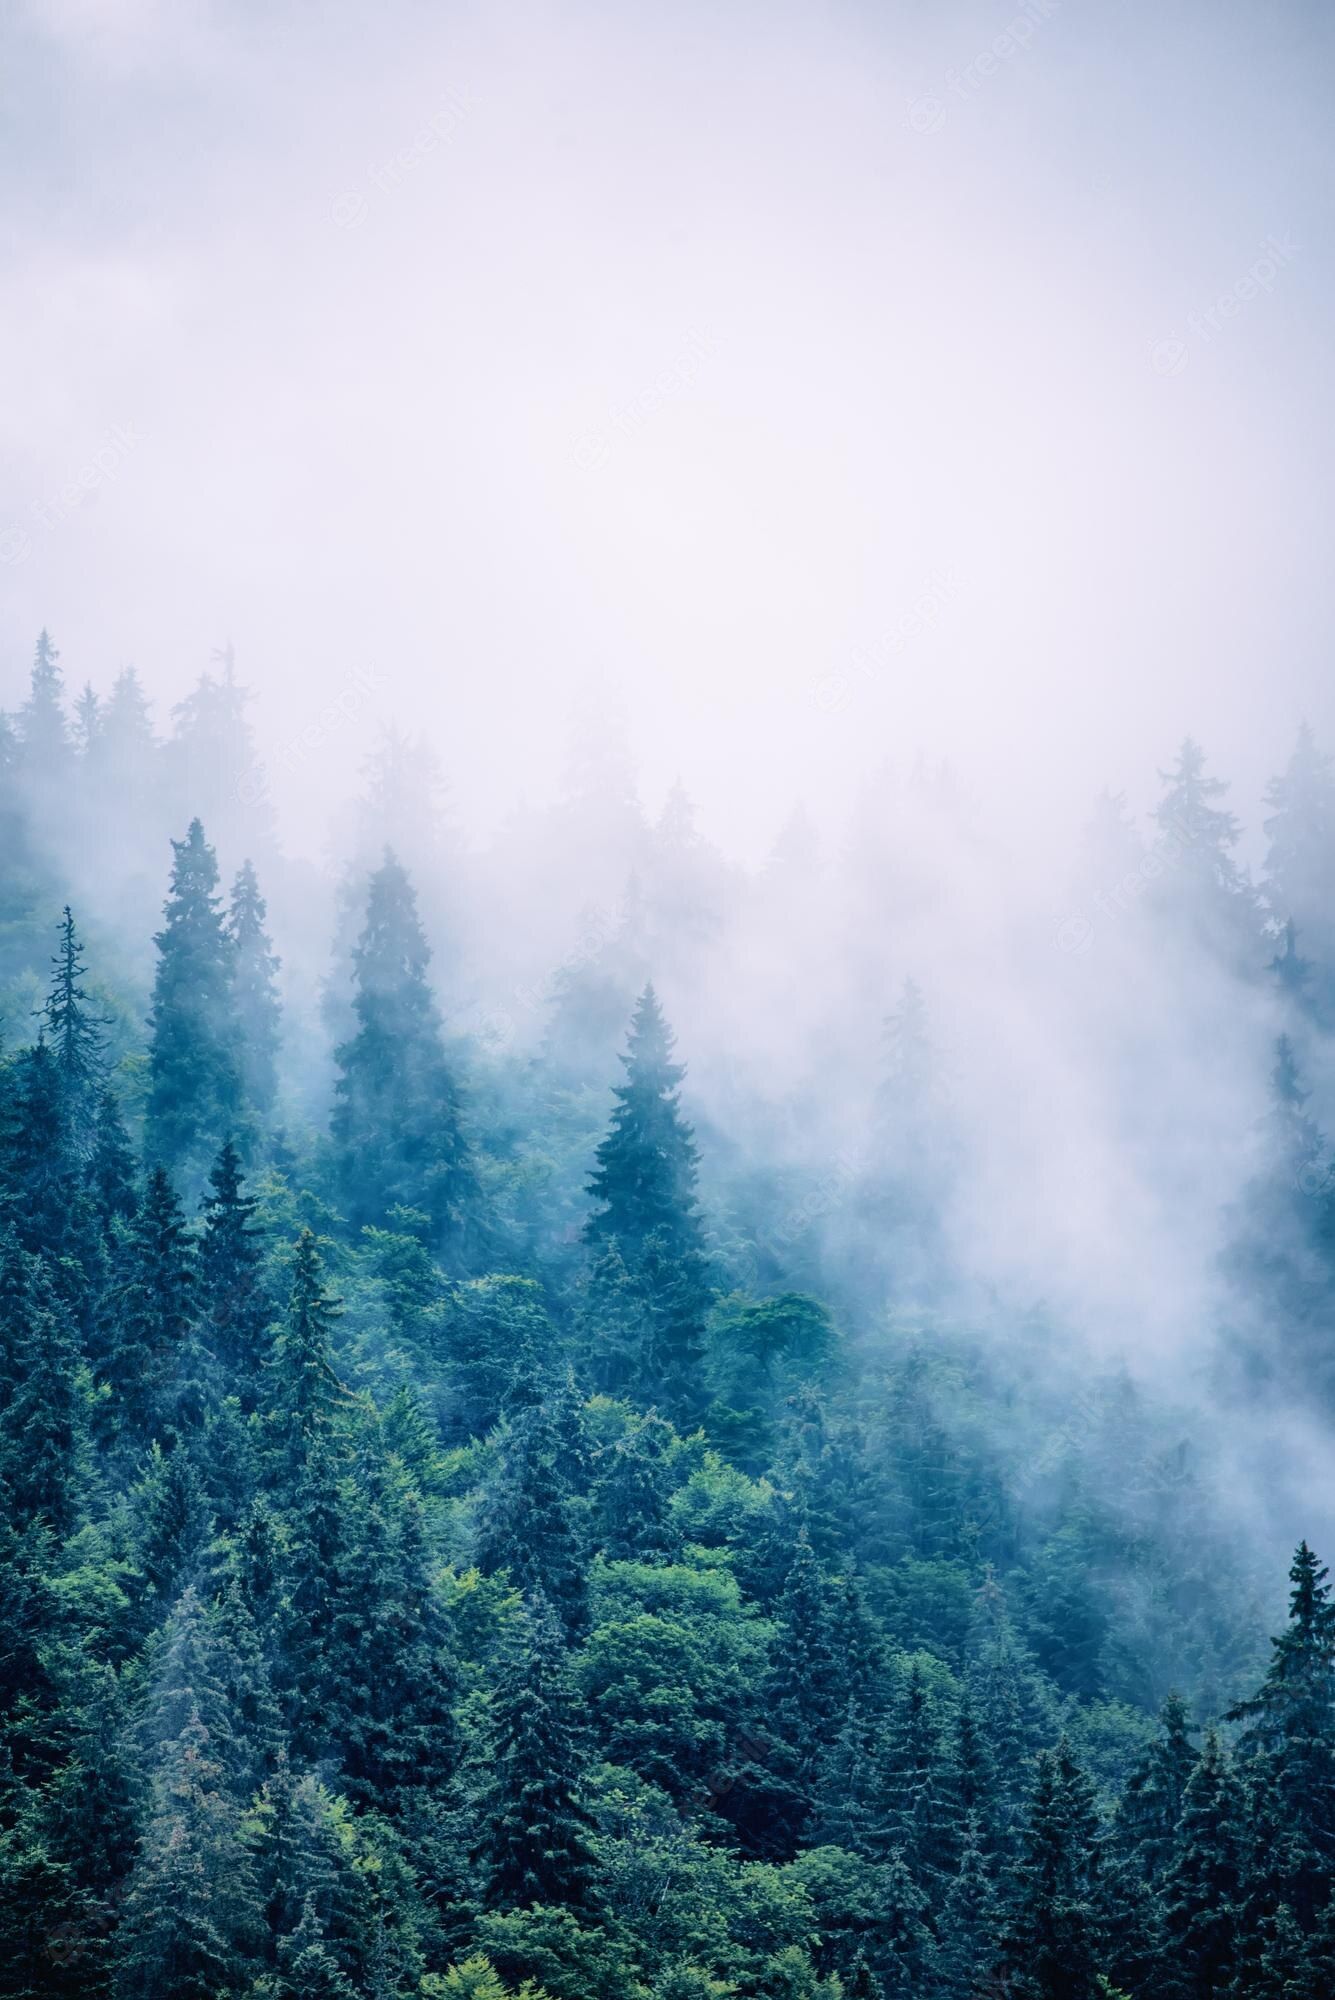 A foggy forest with trees and mountains - Foggy forest